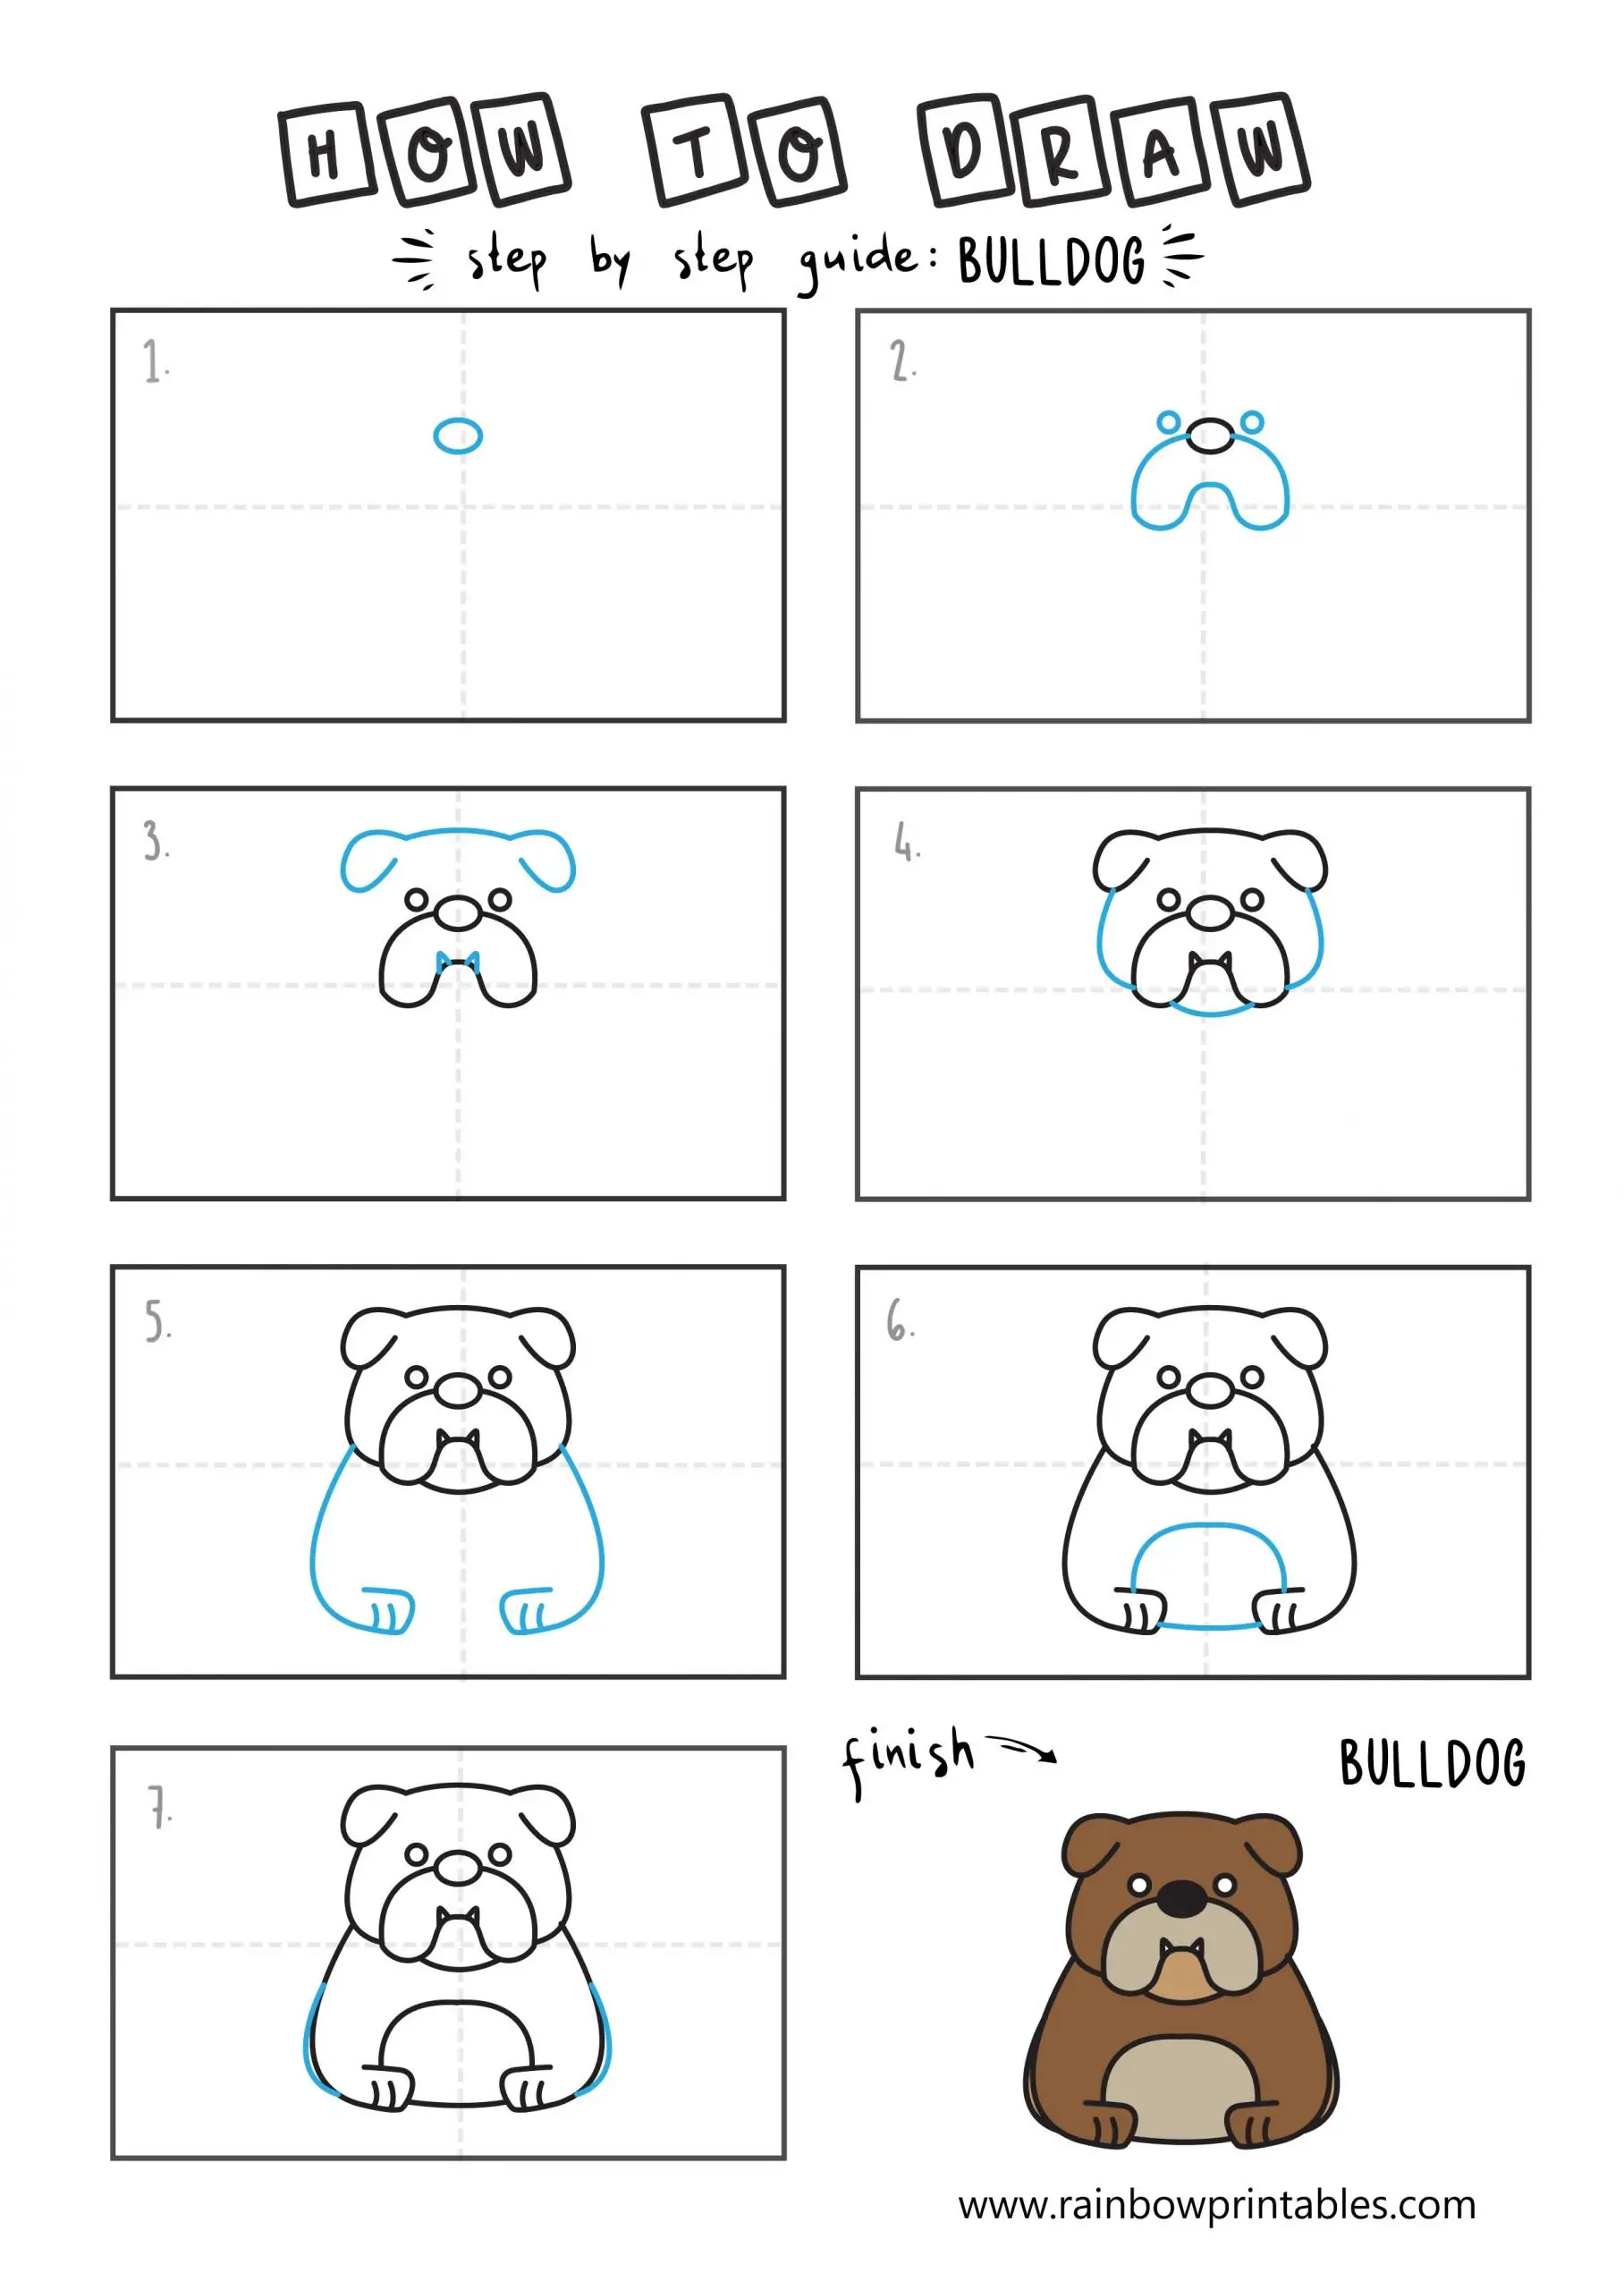 How To Draw a BULLDOG Easy Step By Step For Kids Illustration Art Ideas